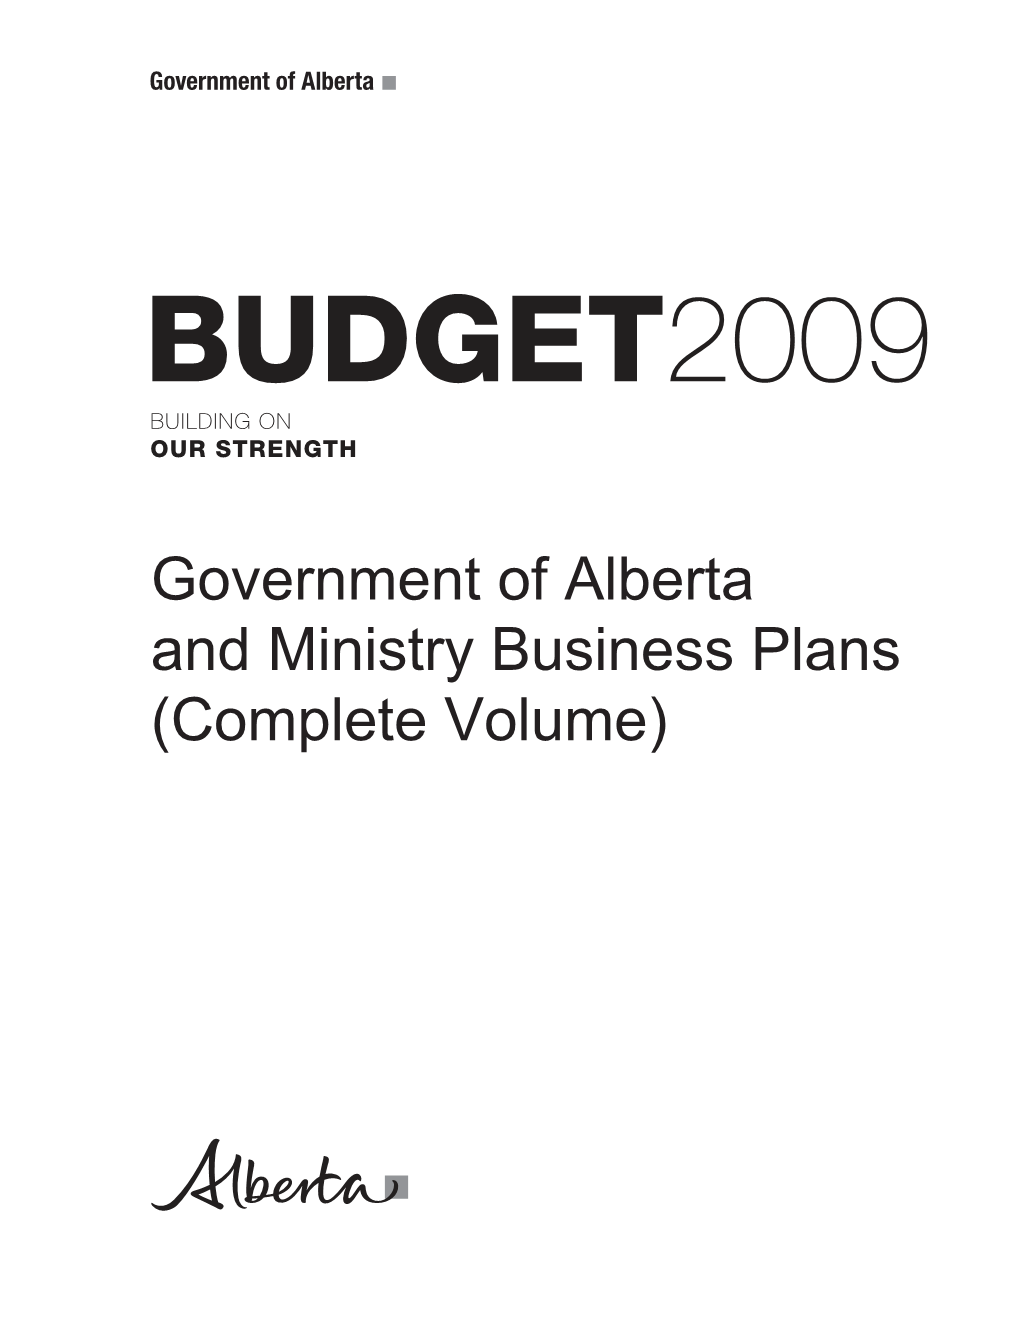 2009-12 Government and Ministry Business Plans (Complete Volume)